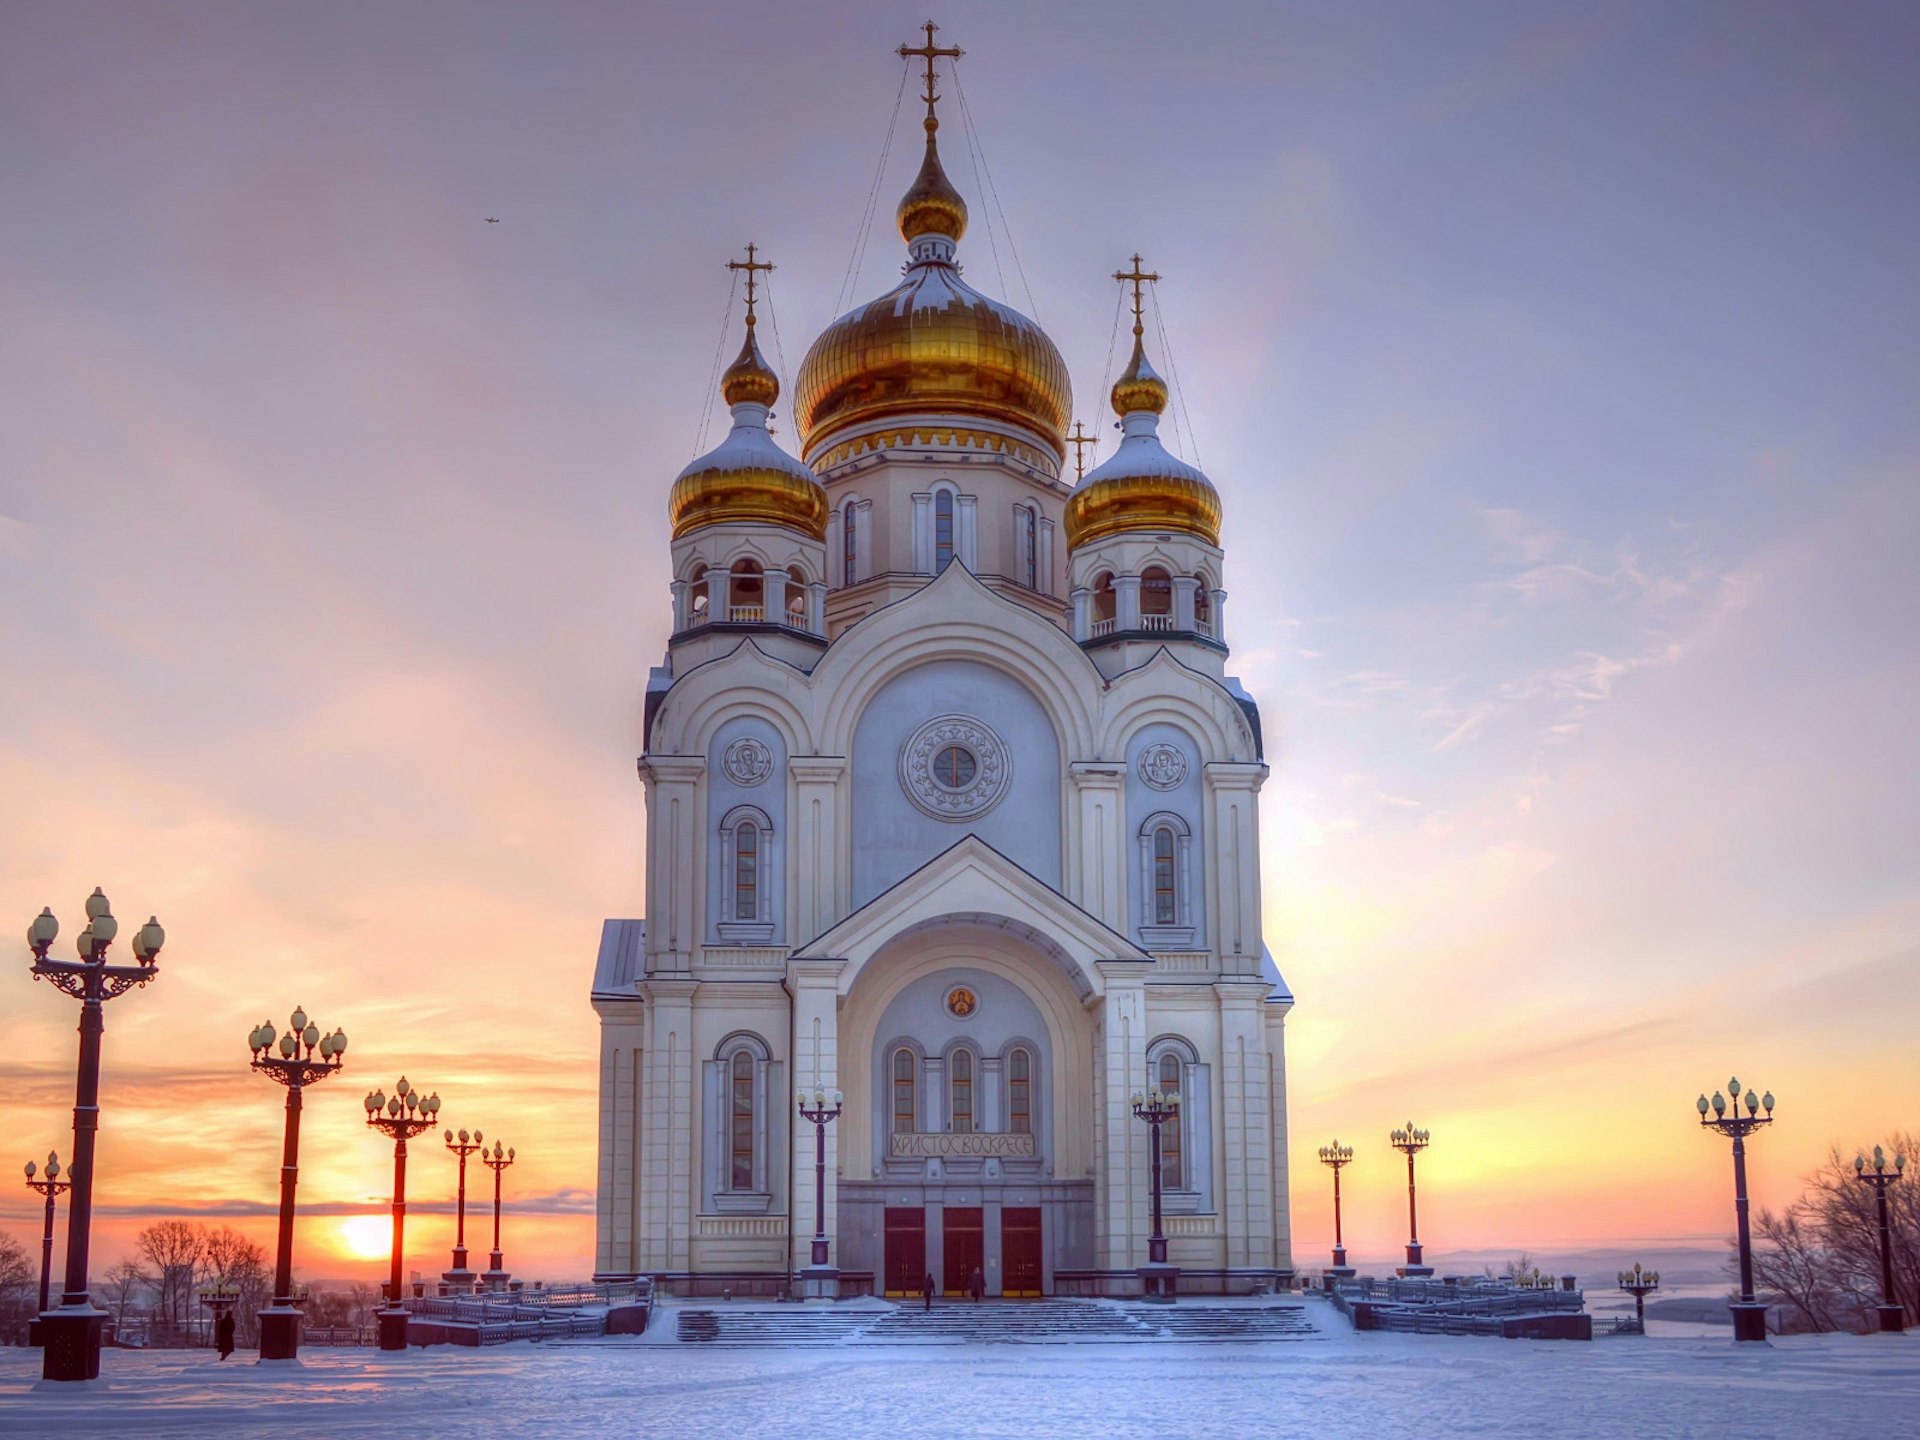 The golden domes of the Transfiguration Cathedral in Khabarovsk are dazzling in the winter sunset © Konstantin Baidin / Shutterstock